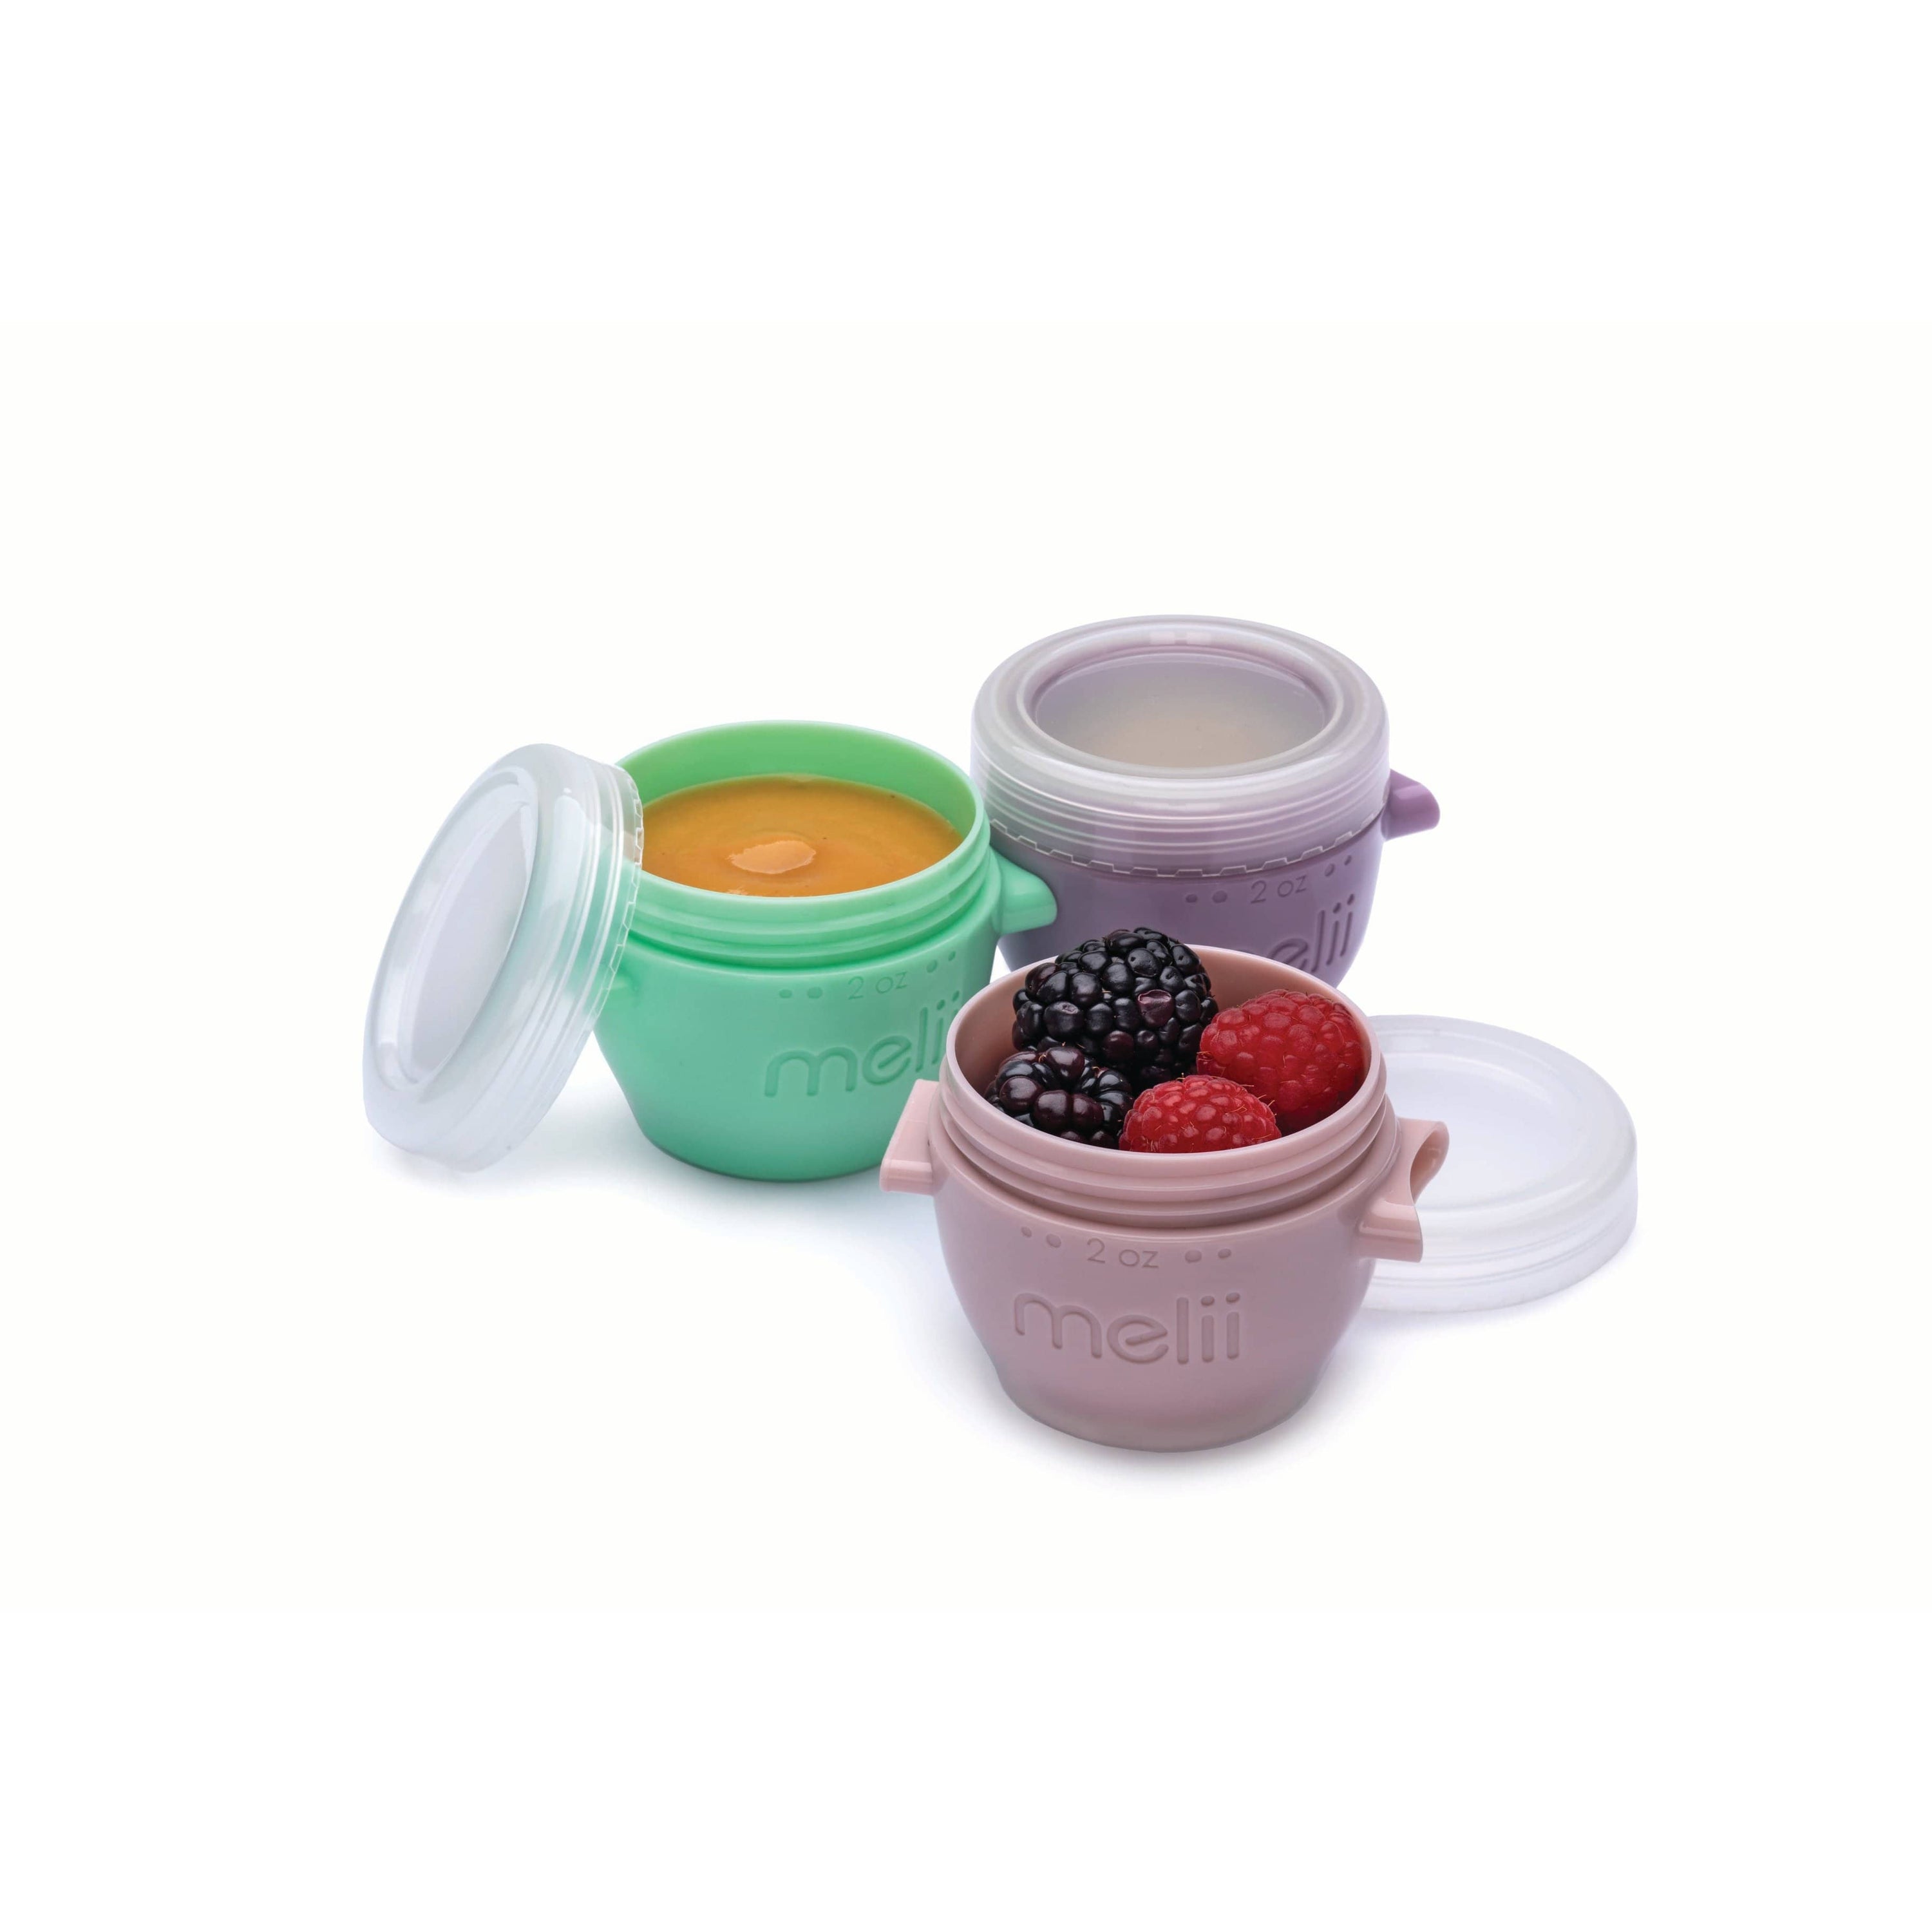 https://www.liltulips.com/cdn/shop/products/2oz-snap-go-pods-6-freezer-snack-containers-melii-lil-tulips-28193855733878.jpg?v=1633484340&width=3000